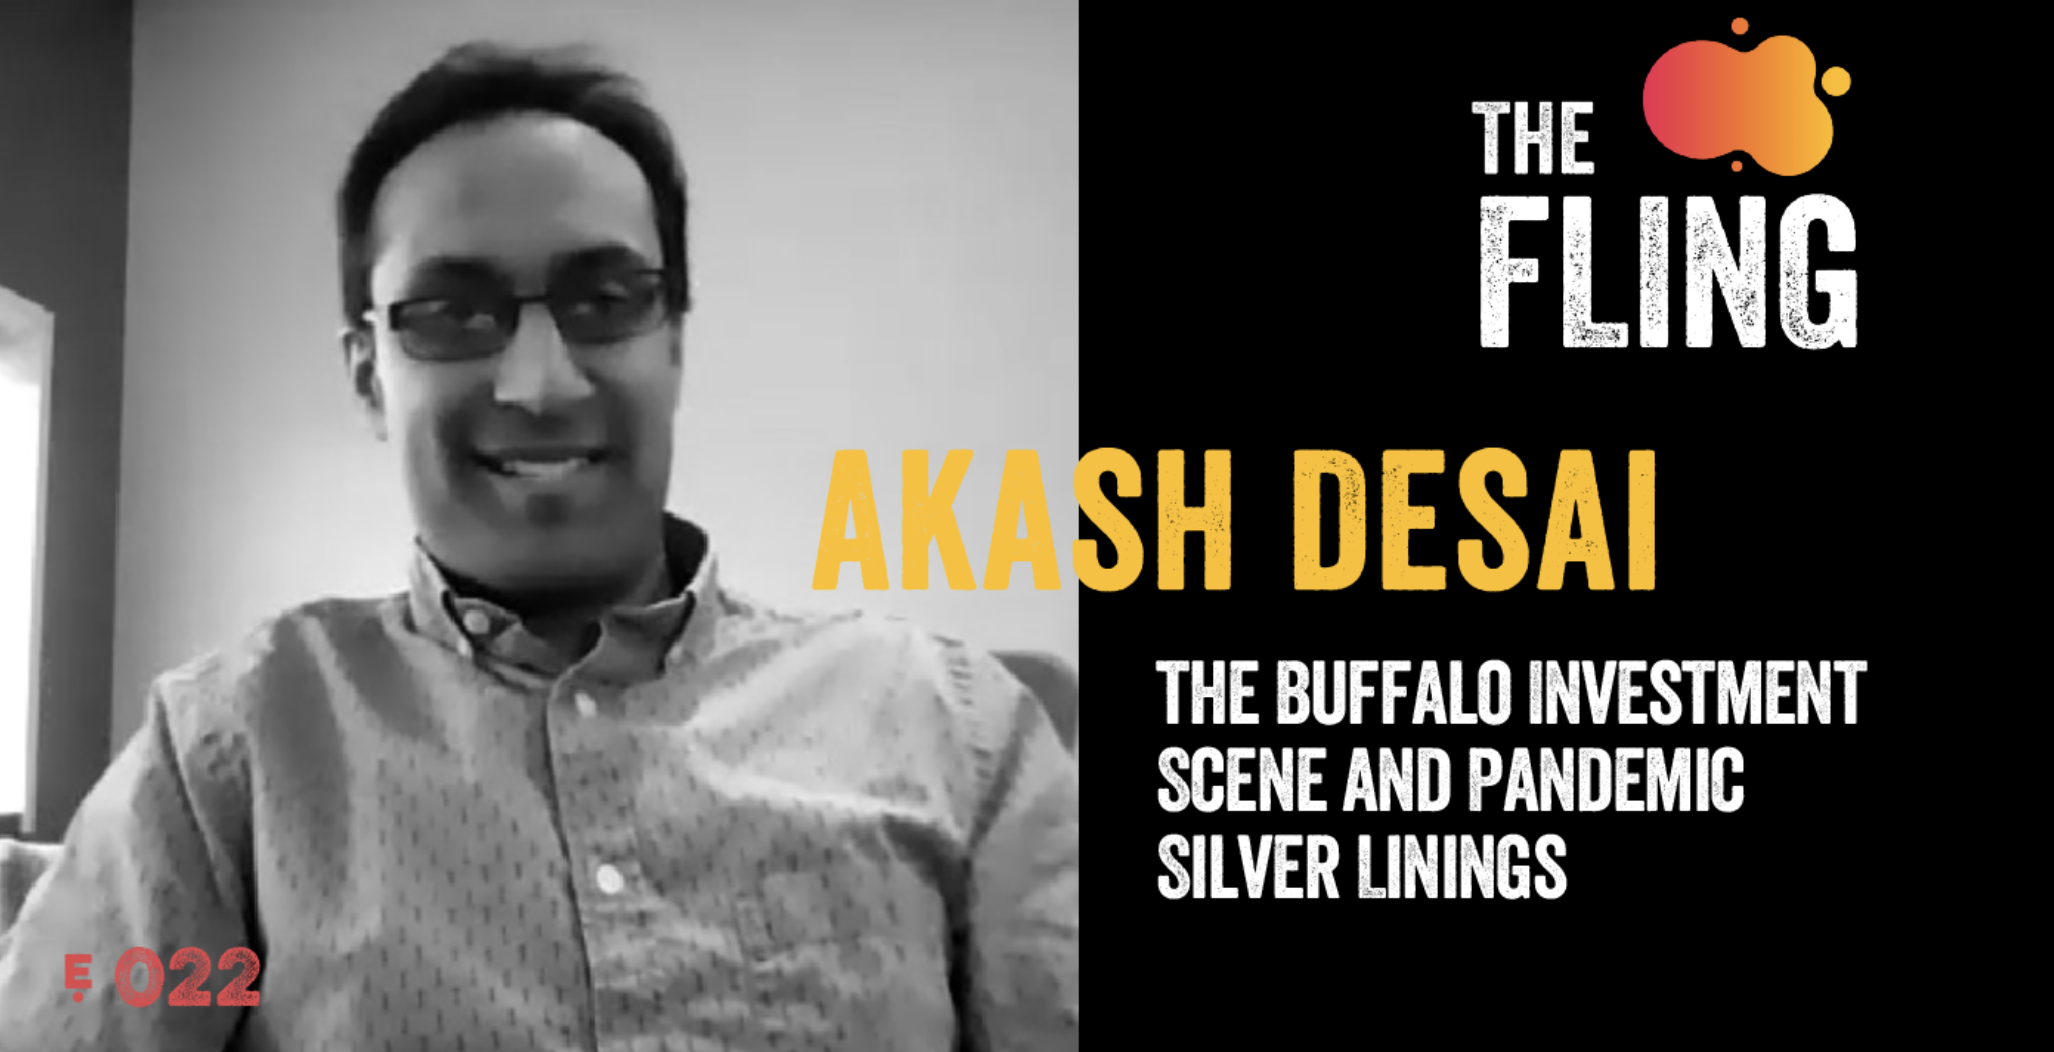 Akash Desai, the Buffalo Investment Scene and Pandemic Silver Linings - The Fling Podcast by The Gist